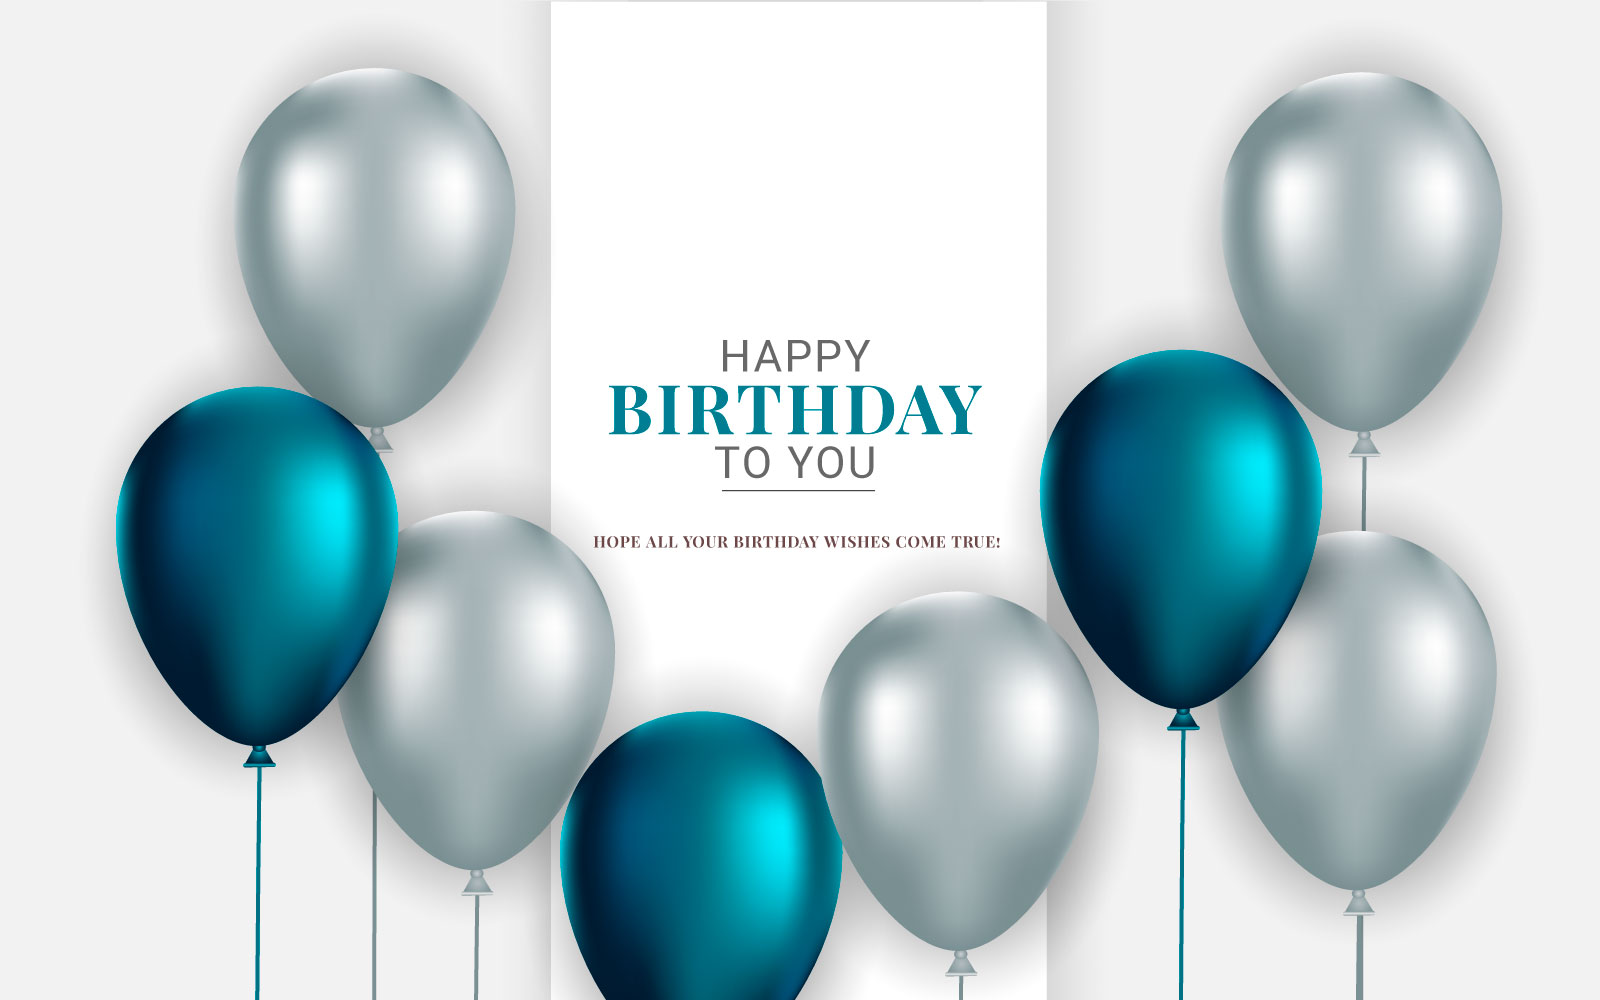 Happy Birthday congratulations template design with Colorful balloon  birthday background